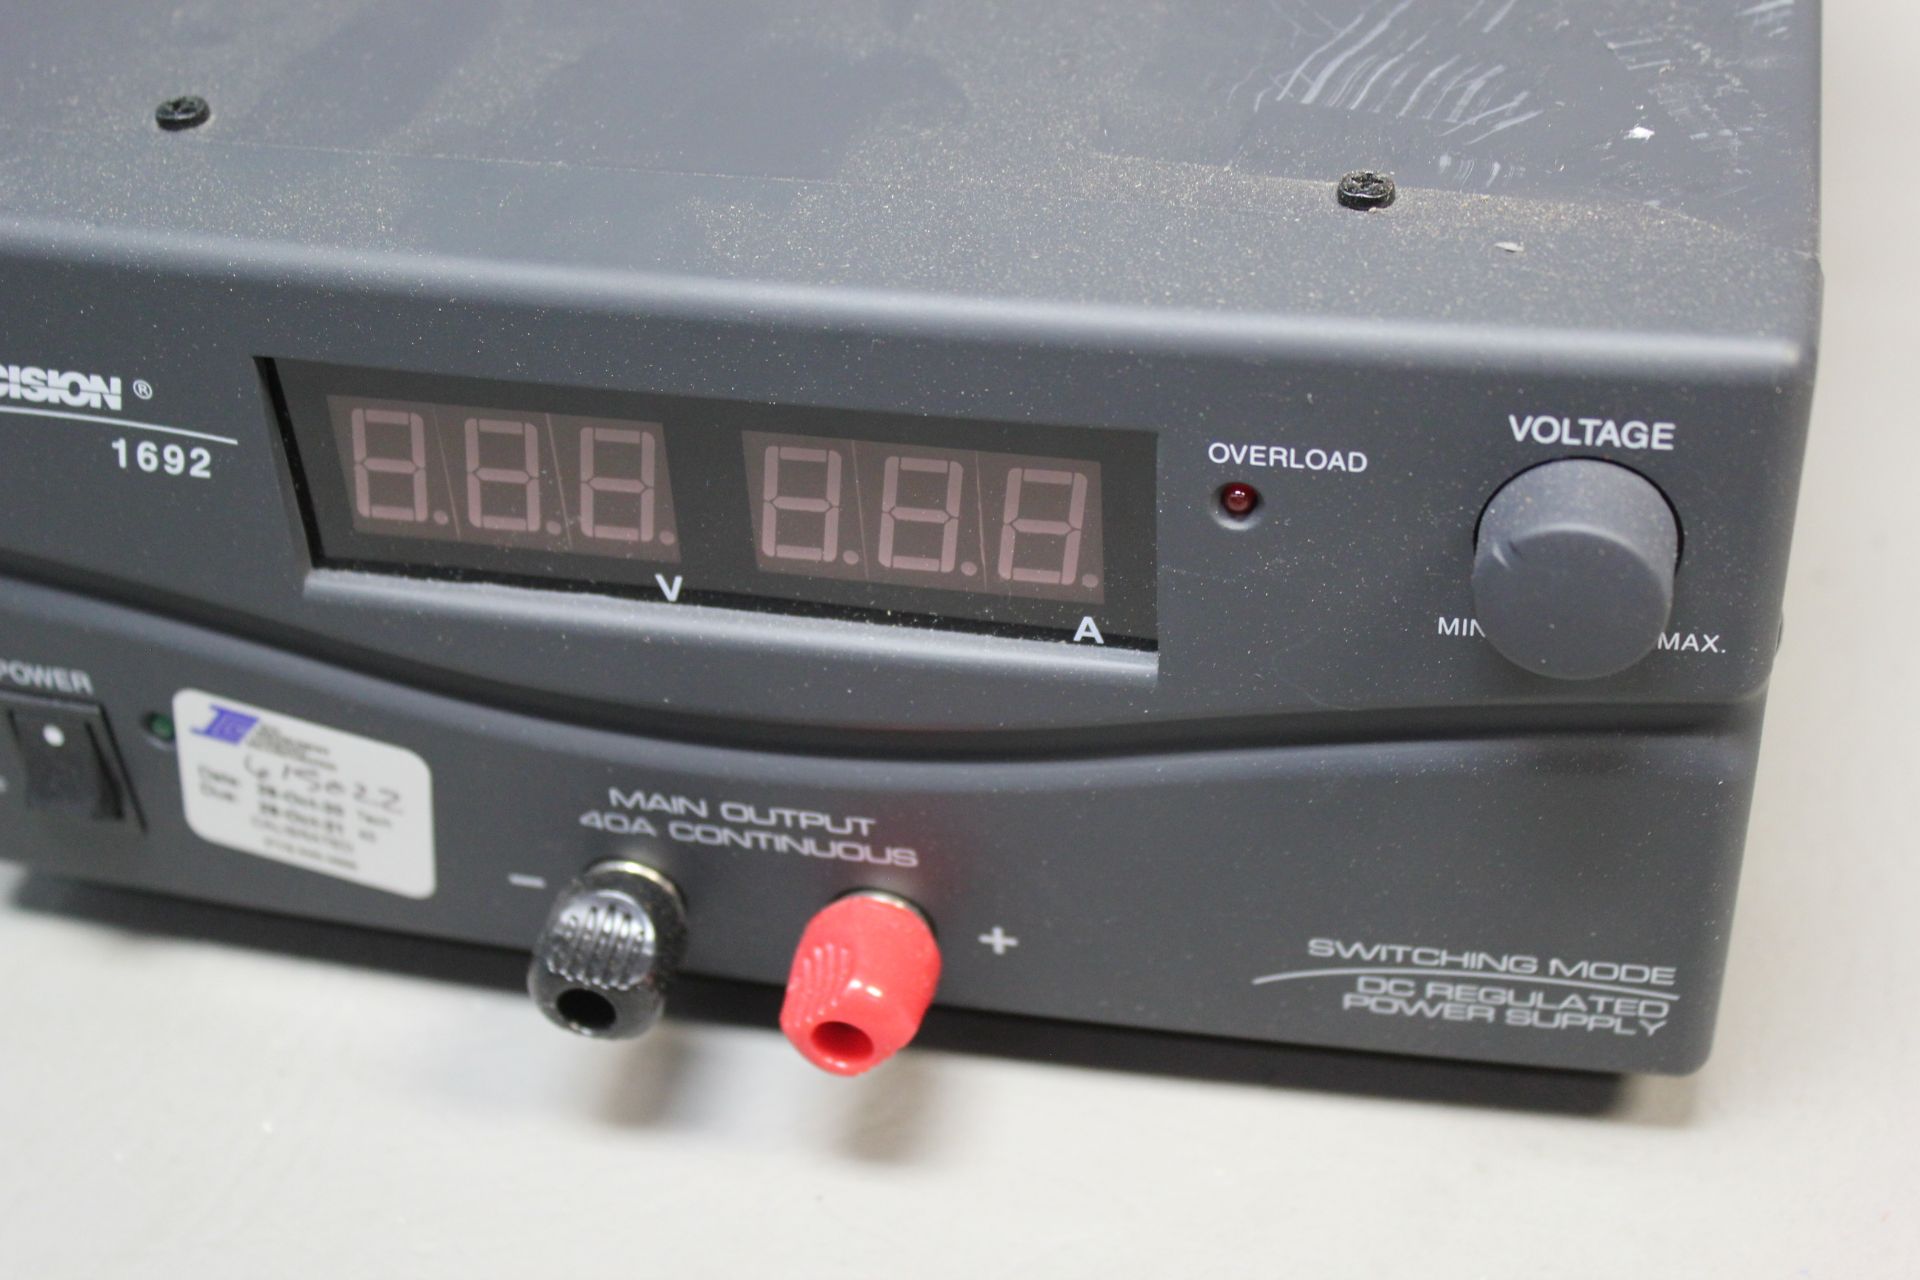 BK PRECISION DC REGULATED POWER SUPPLY - Image 3 of 6